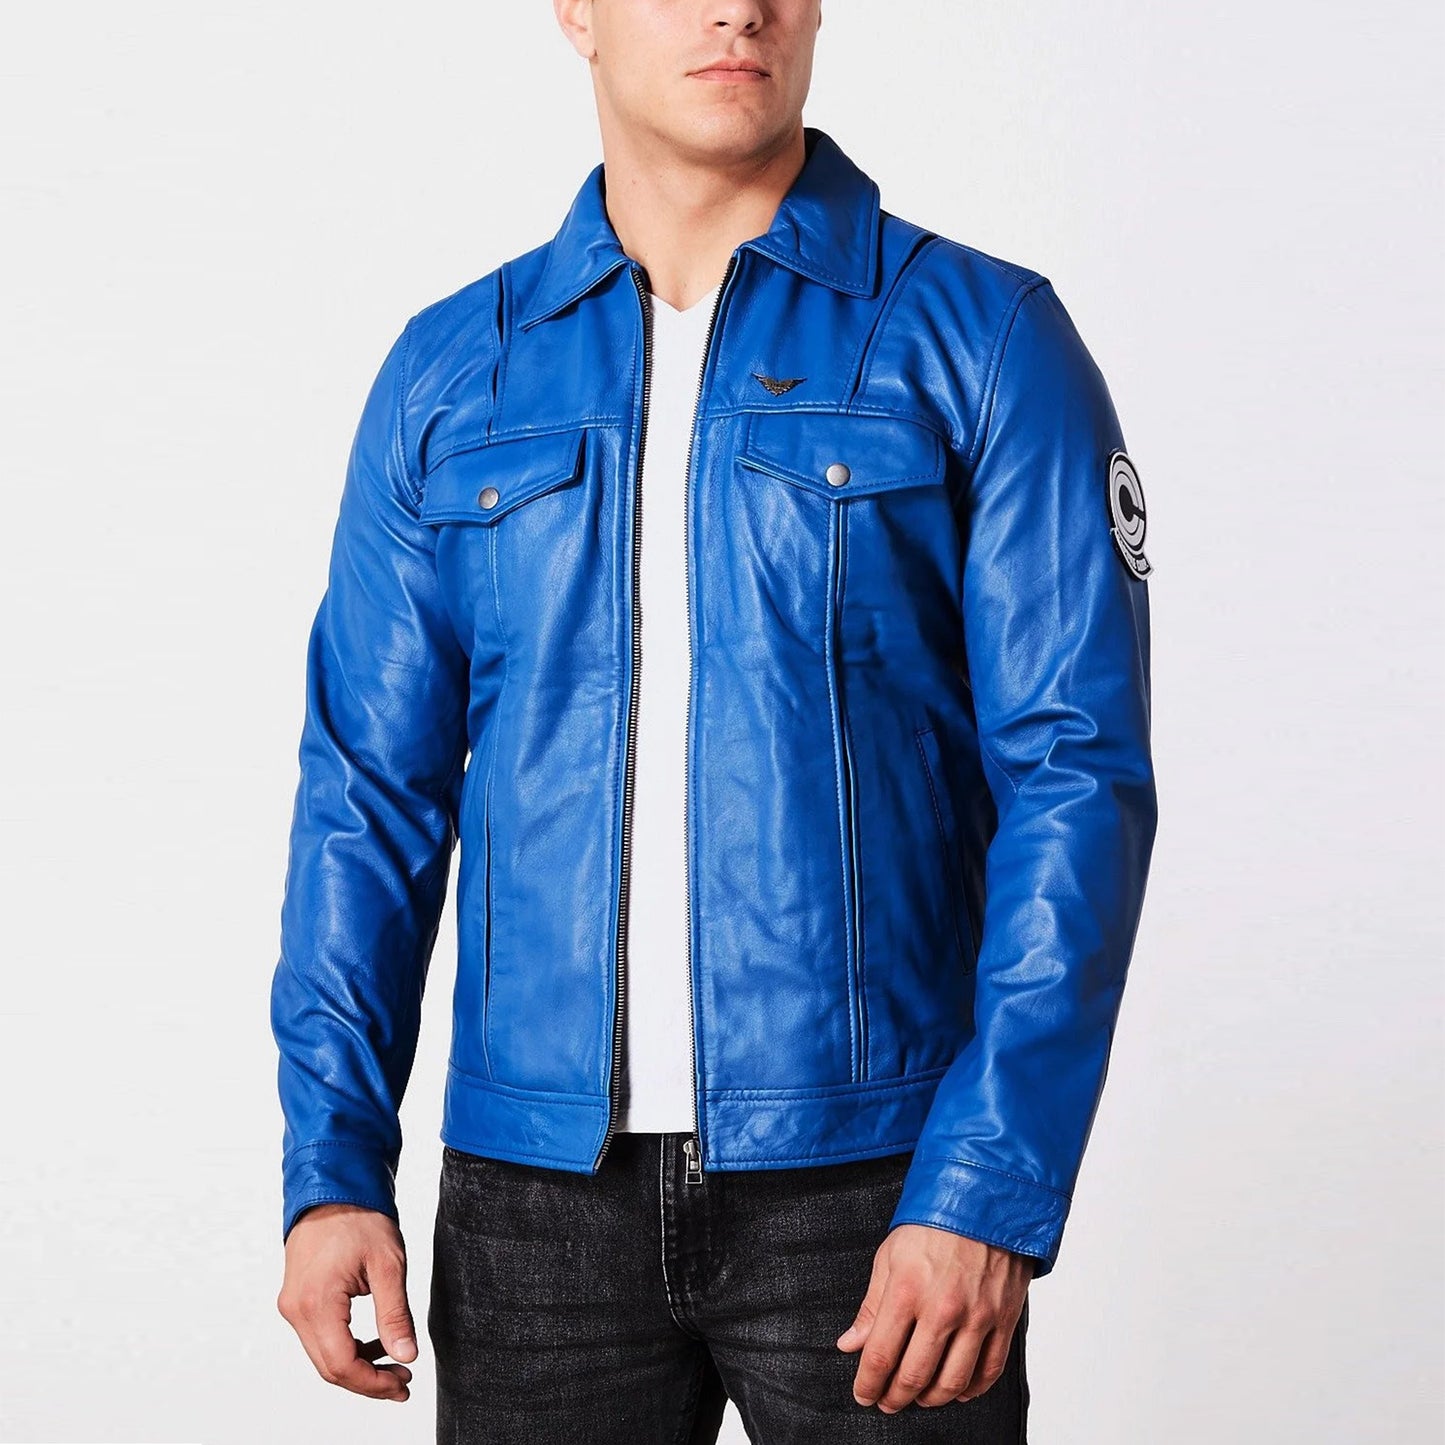 Future Trunks (Dragon Ball Z) Capsule Corp Blue Leather Jacket by